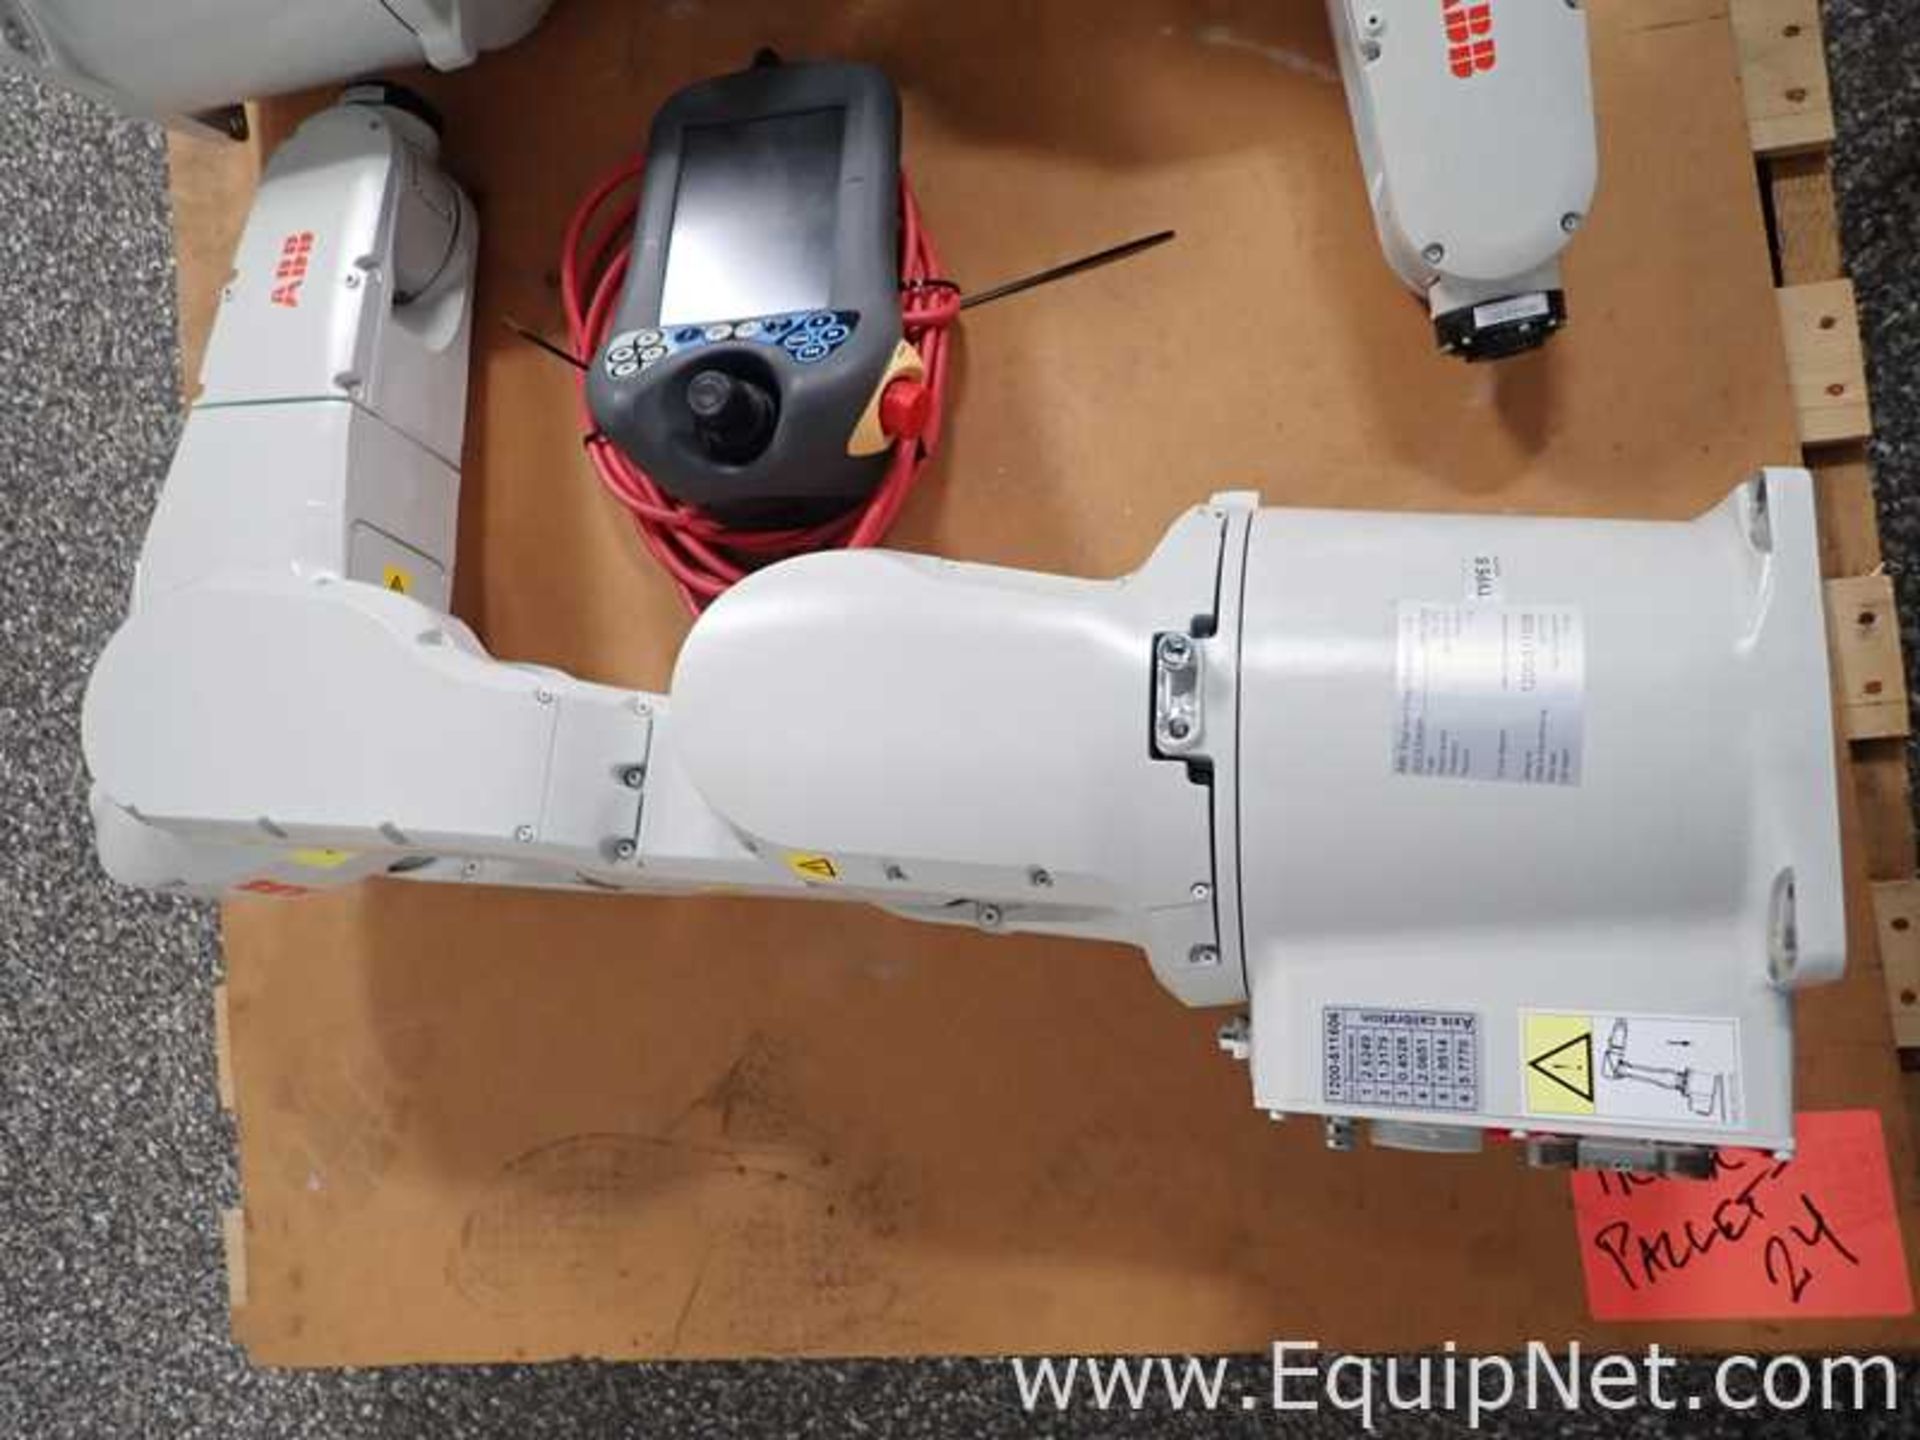 Lot of 2 ABB IRB 1200 Robotic Arms with IRC5 Industrial Controllers - Image 6 of 17